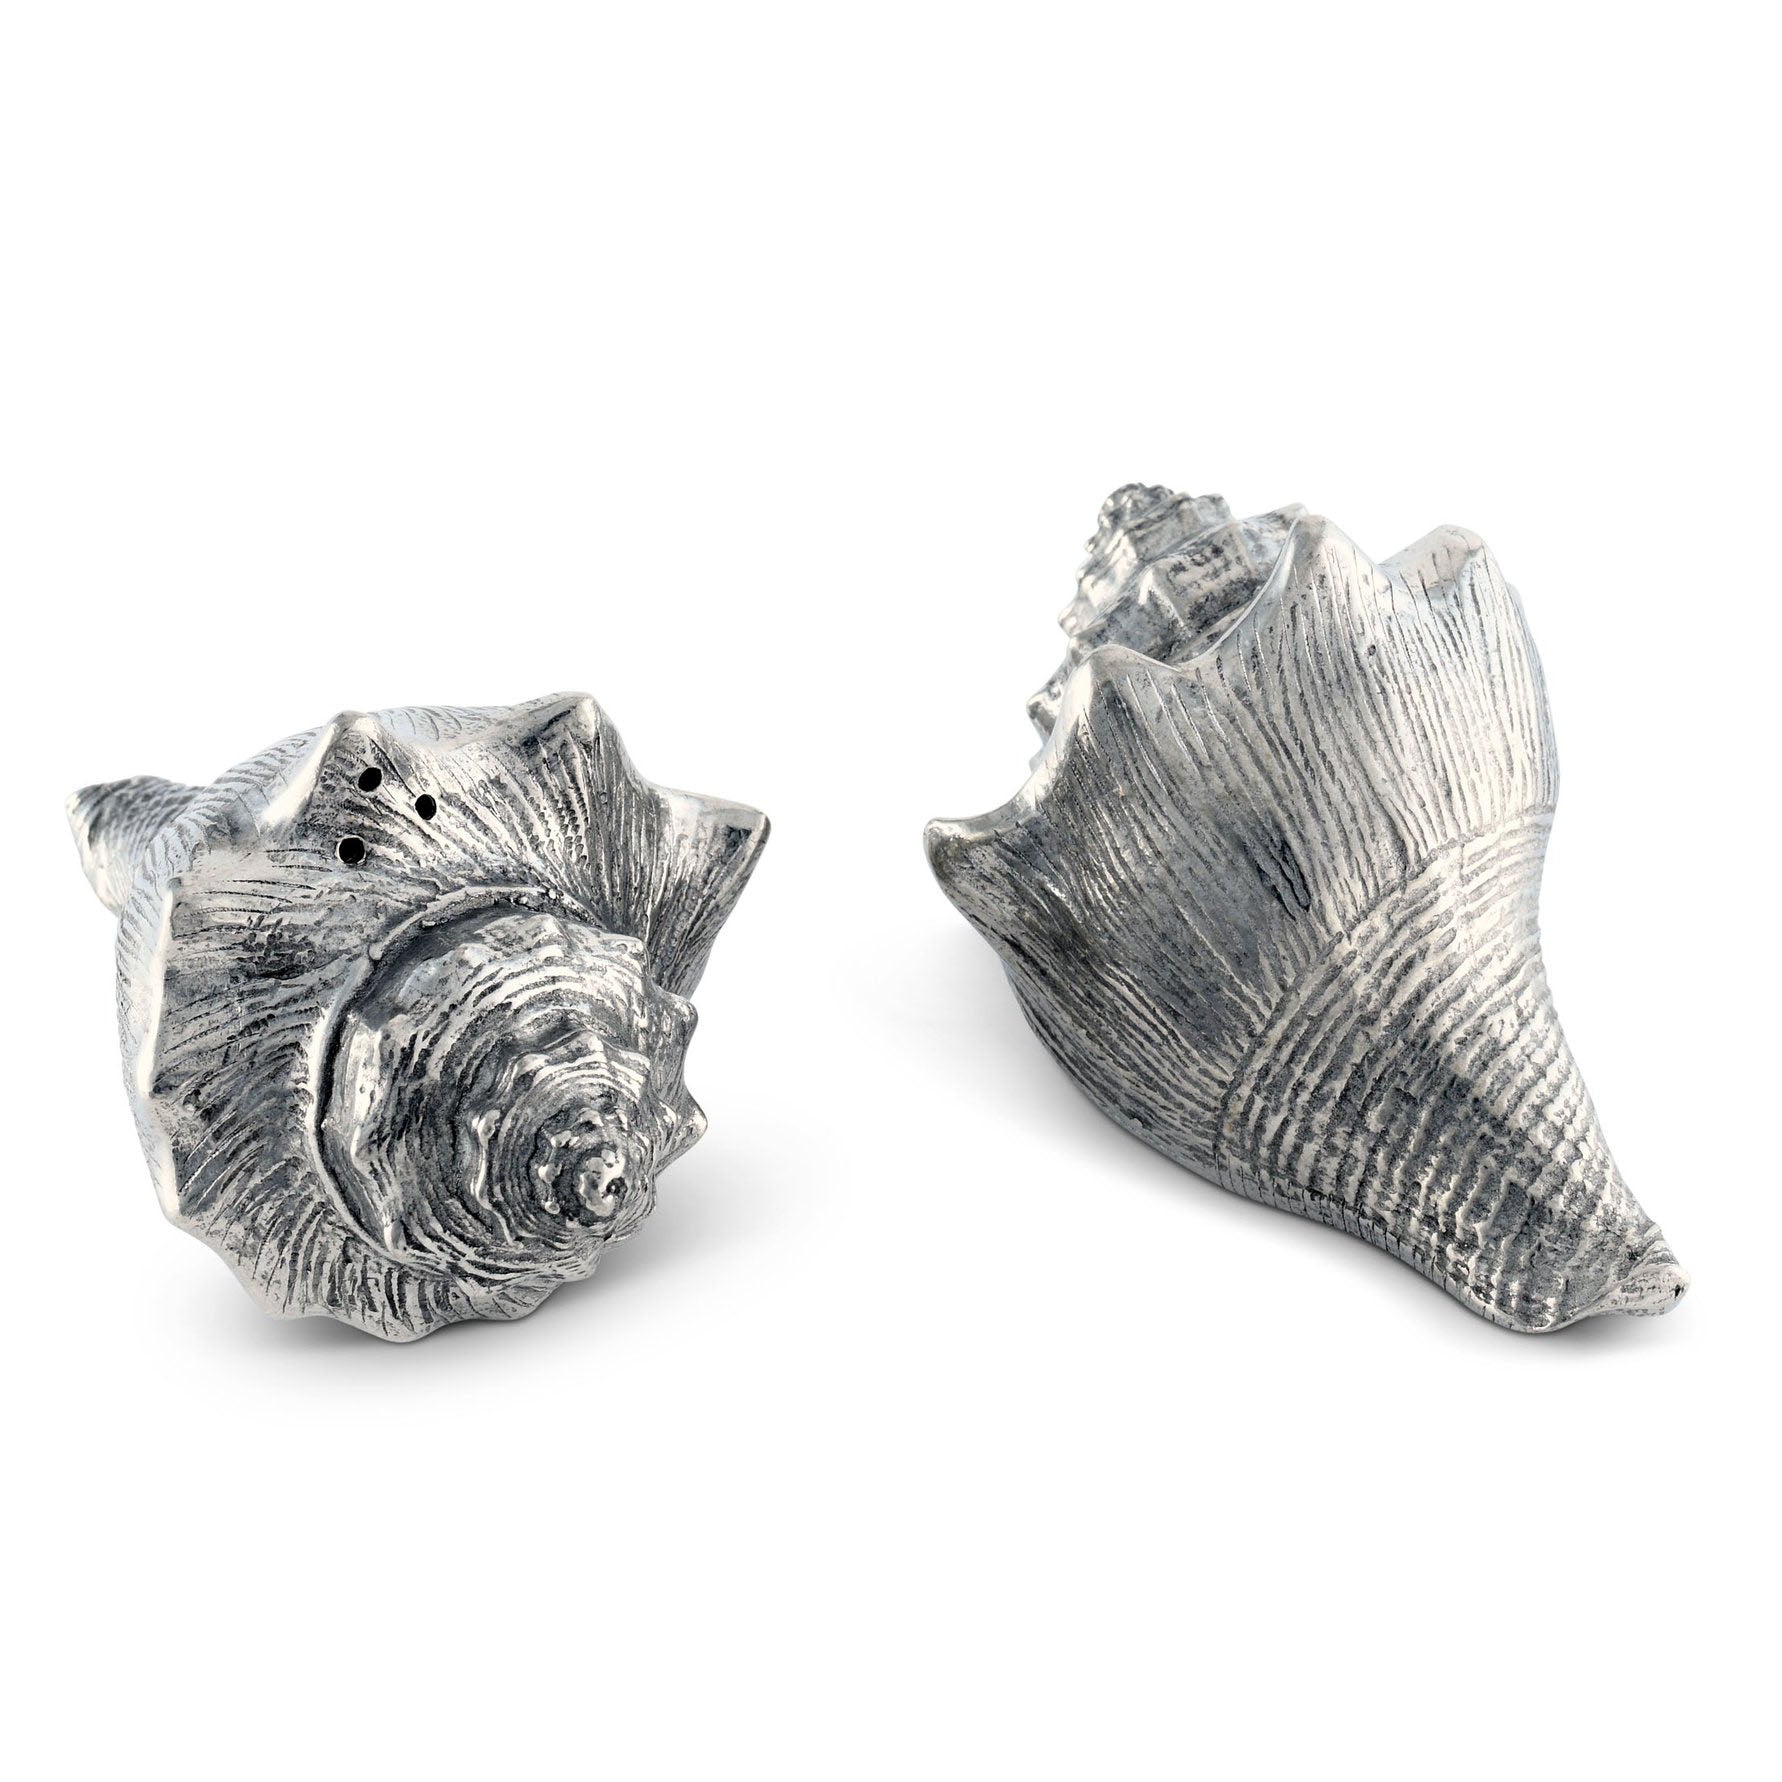 Pewter Conch Shell Salt and Pepper Shakers